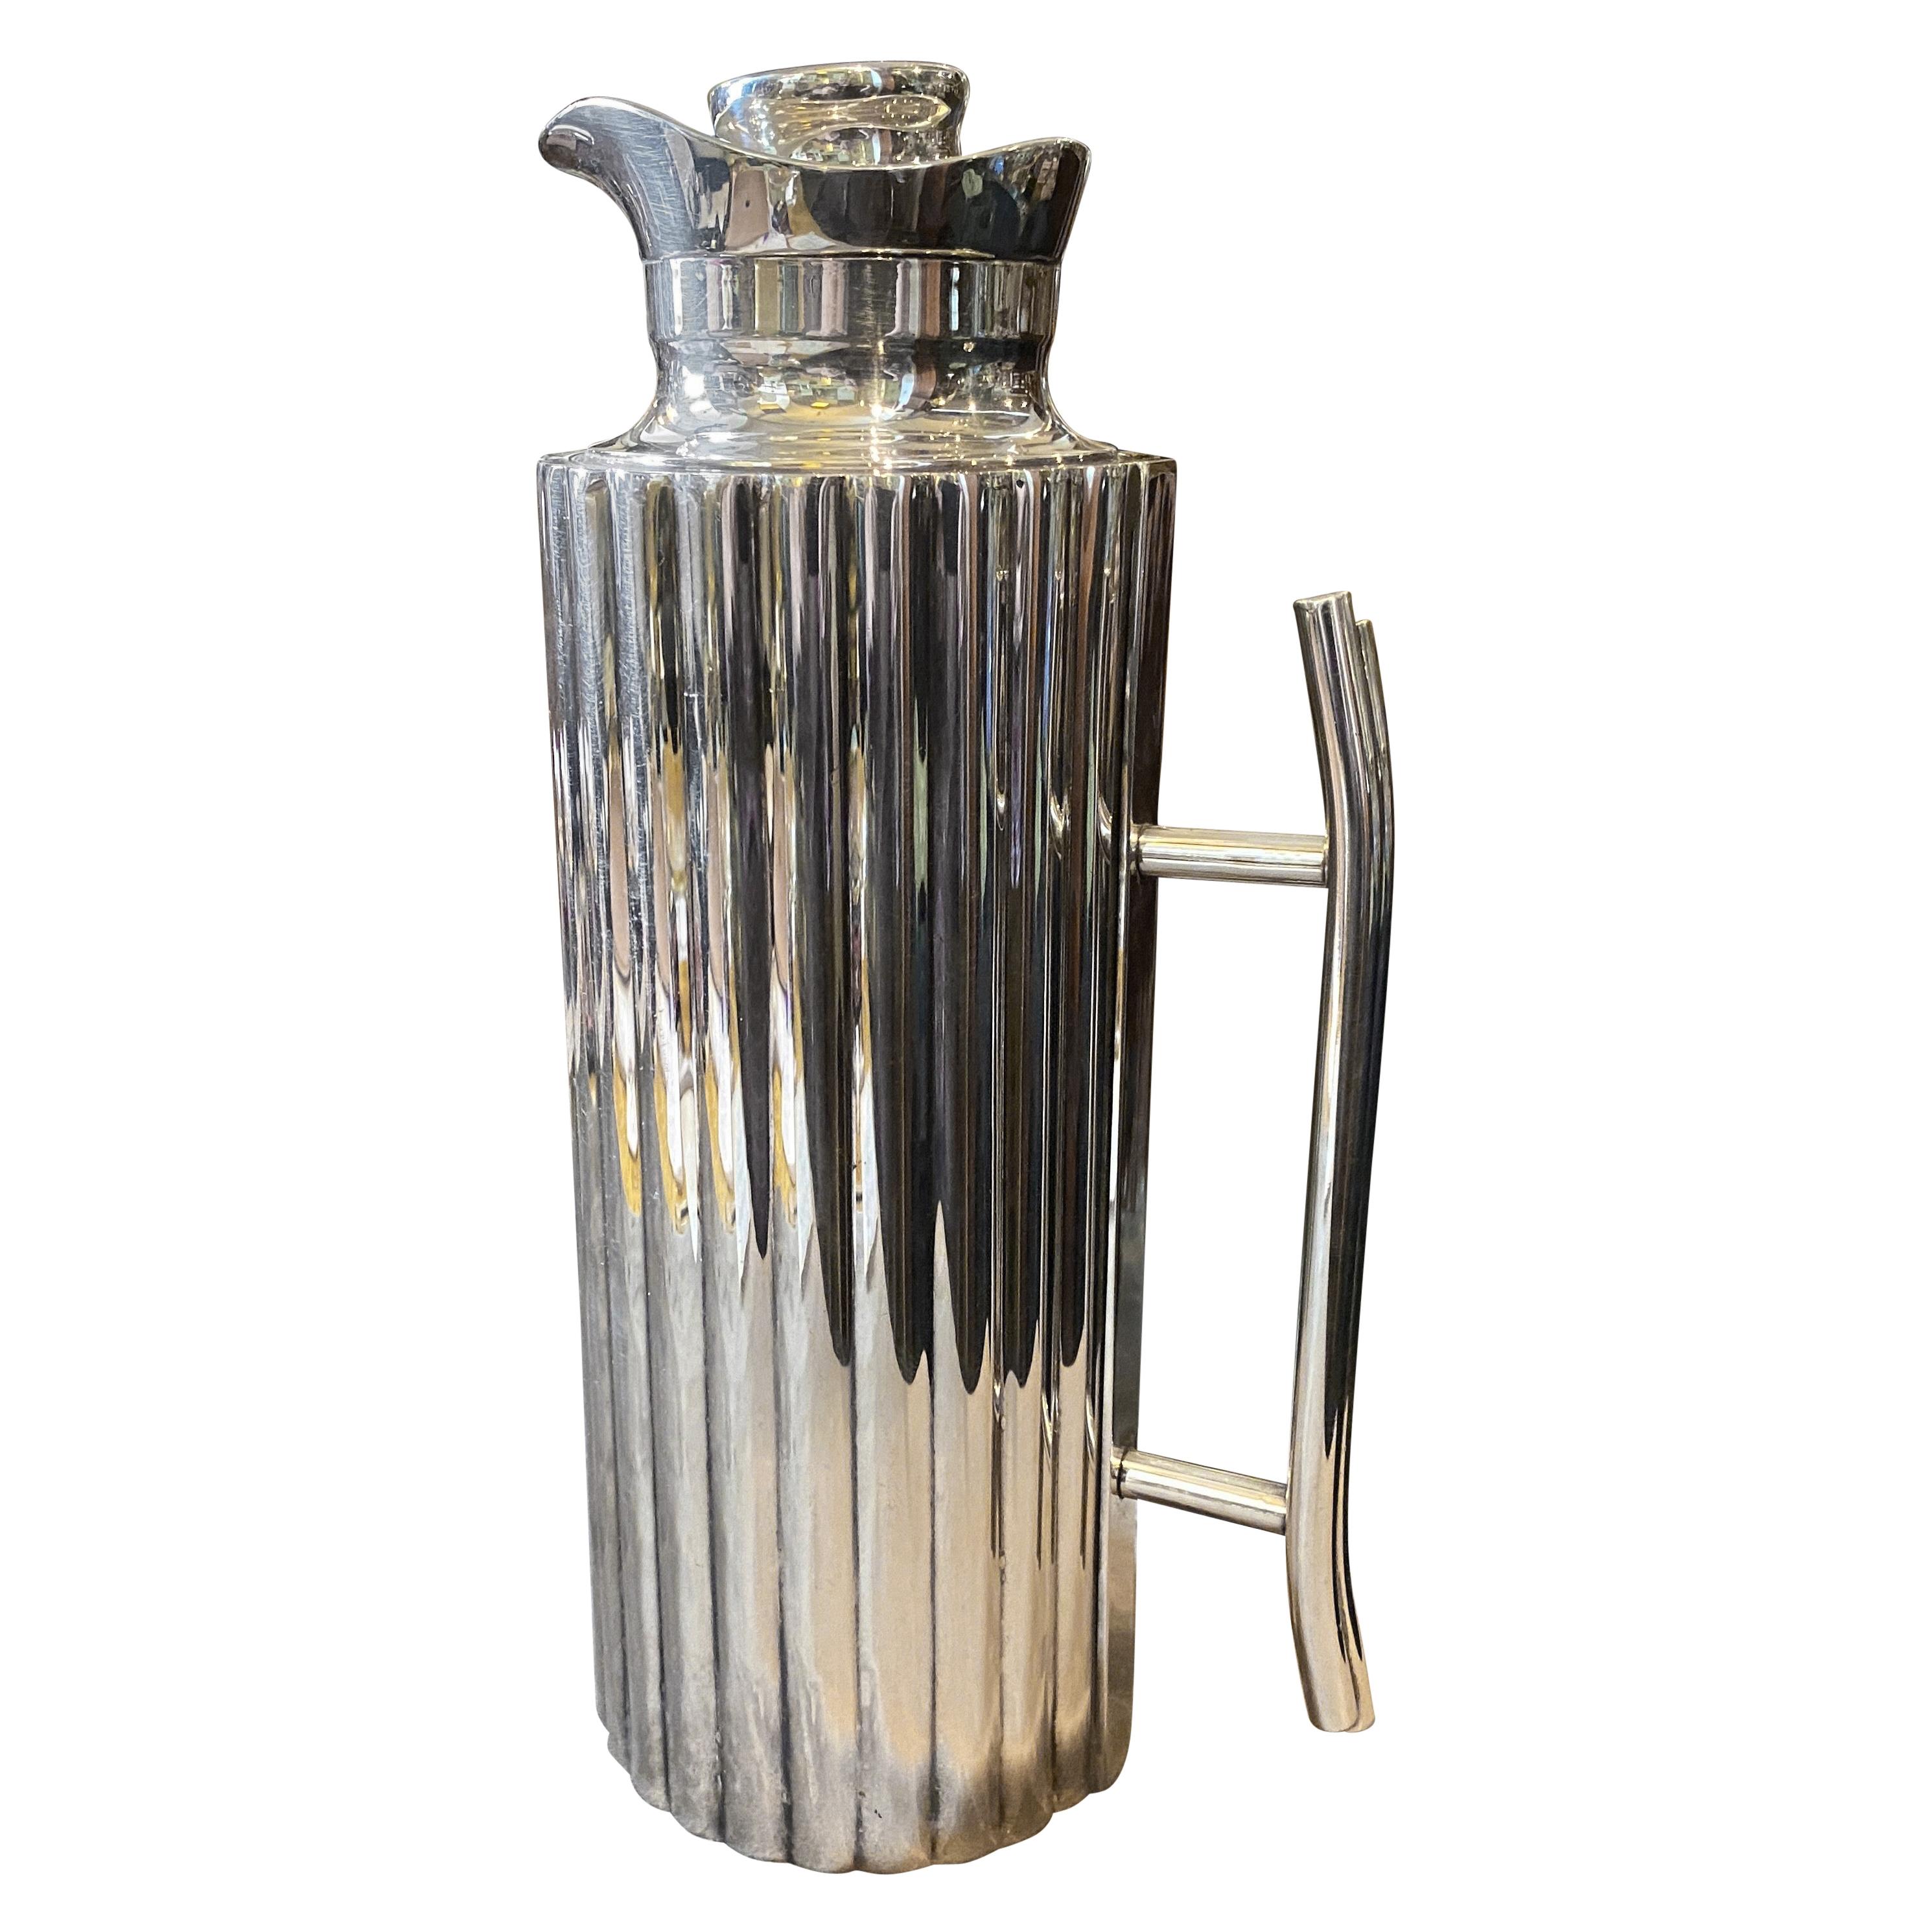 1970 Modernist Silver Plated Italian Thermos Carafe by Cassetti Firenze